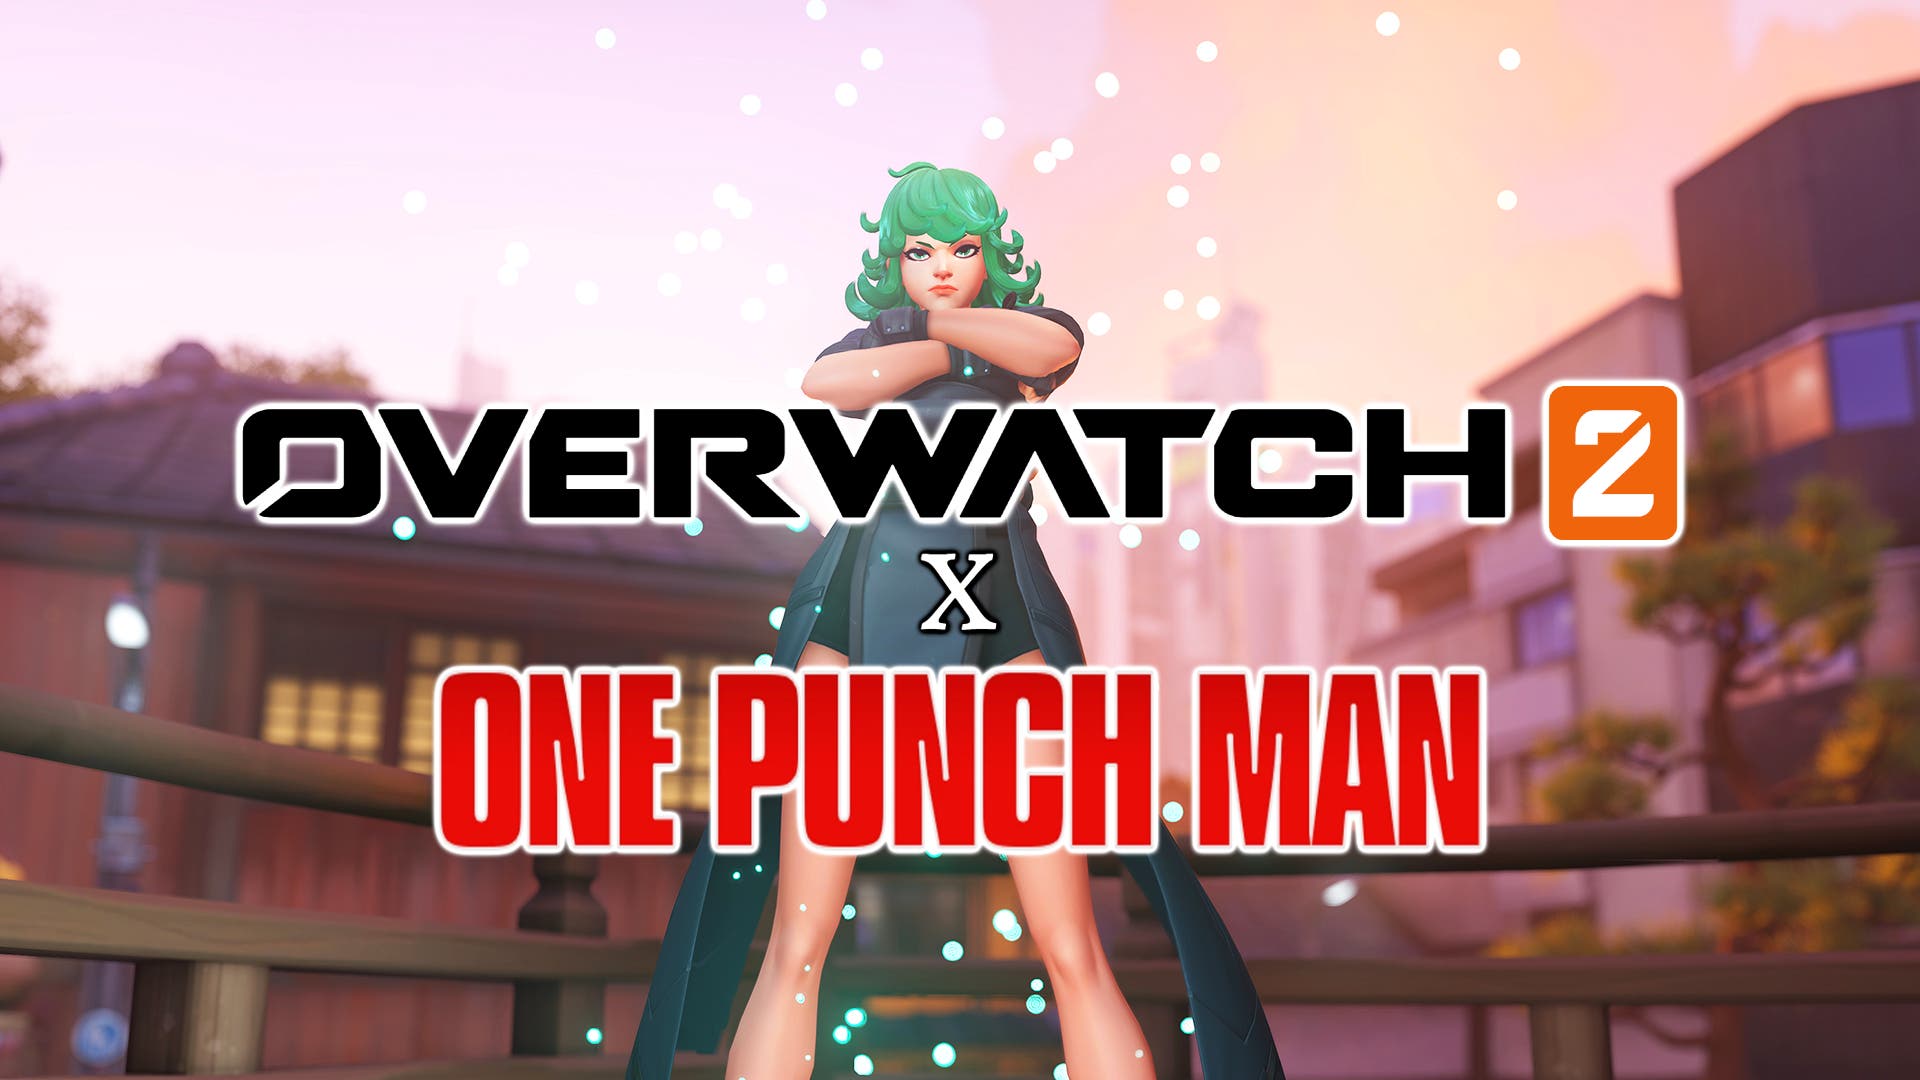 Overwatch 2 x One Punch Man: Can the skins of Saitama, Genos and company be obtained for free?